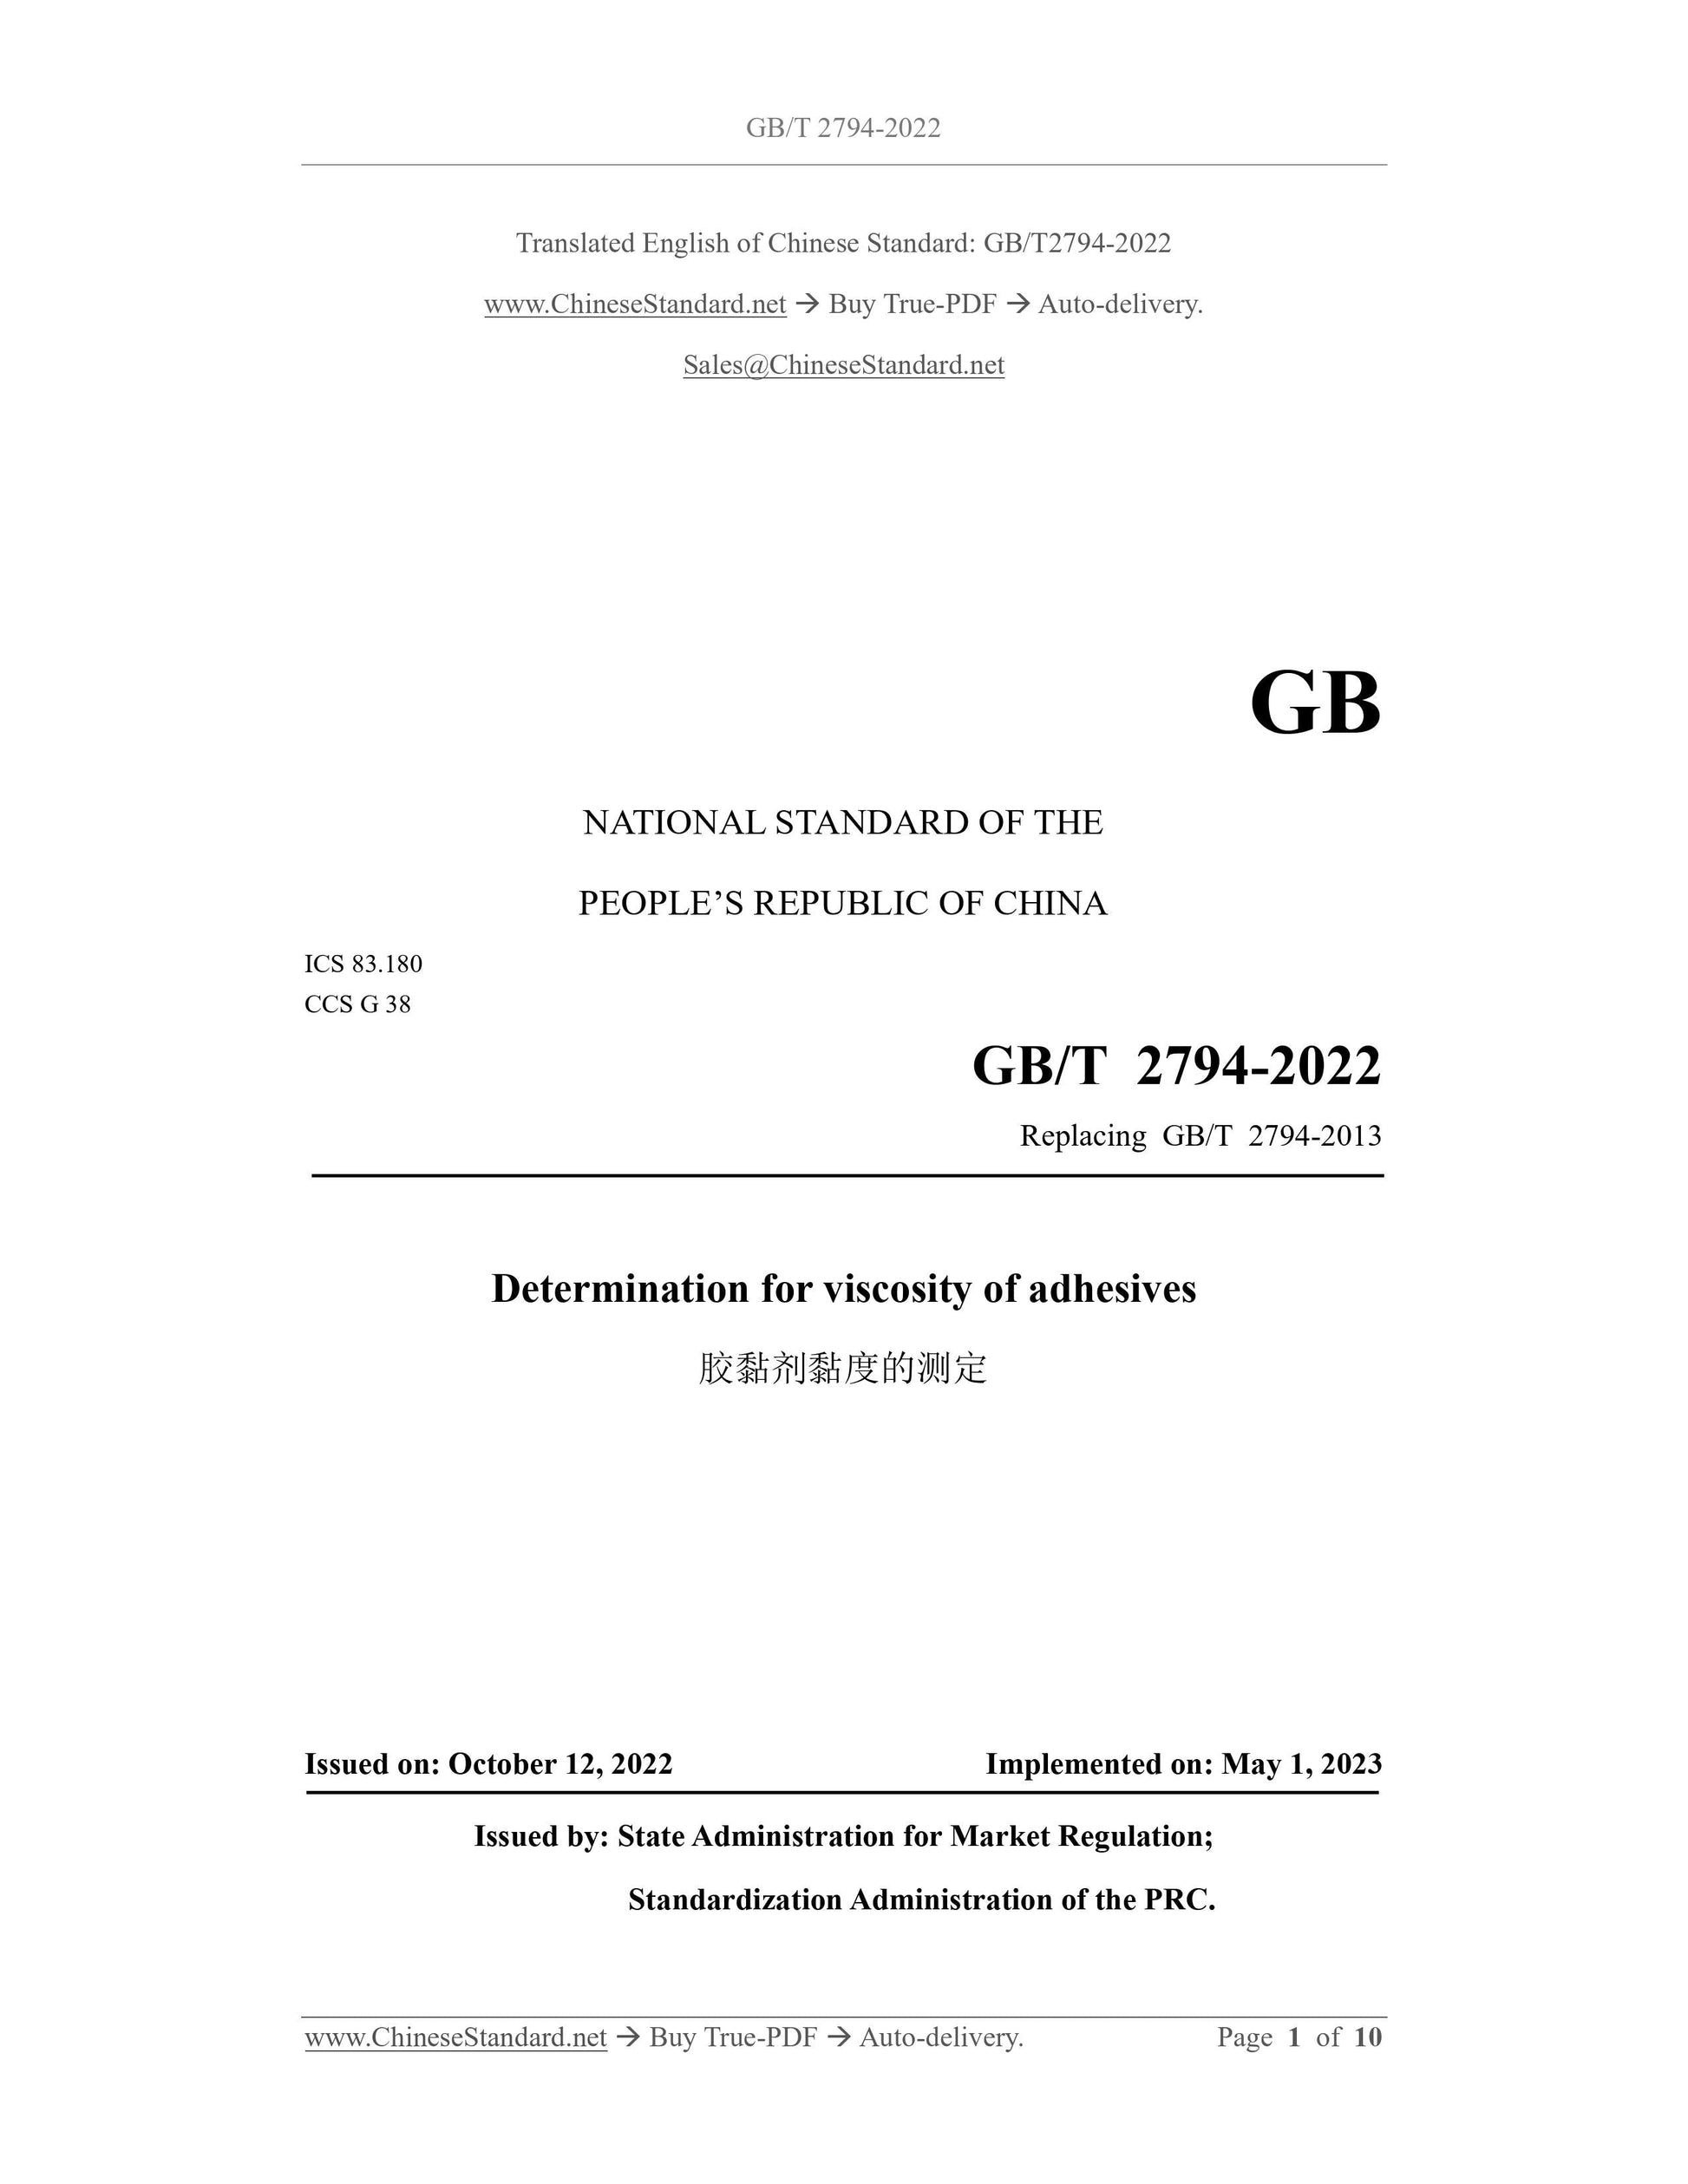 GB/T 2794-2022 Page 1